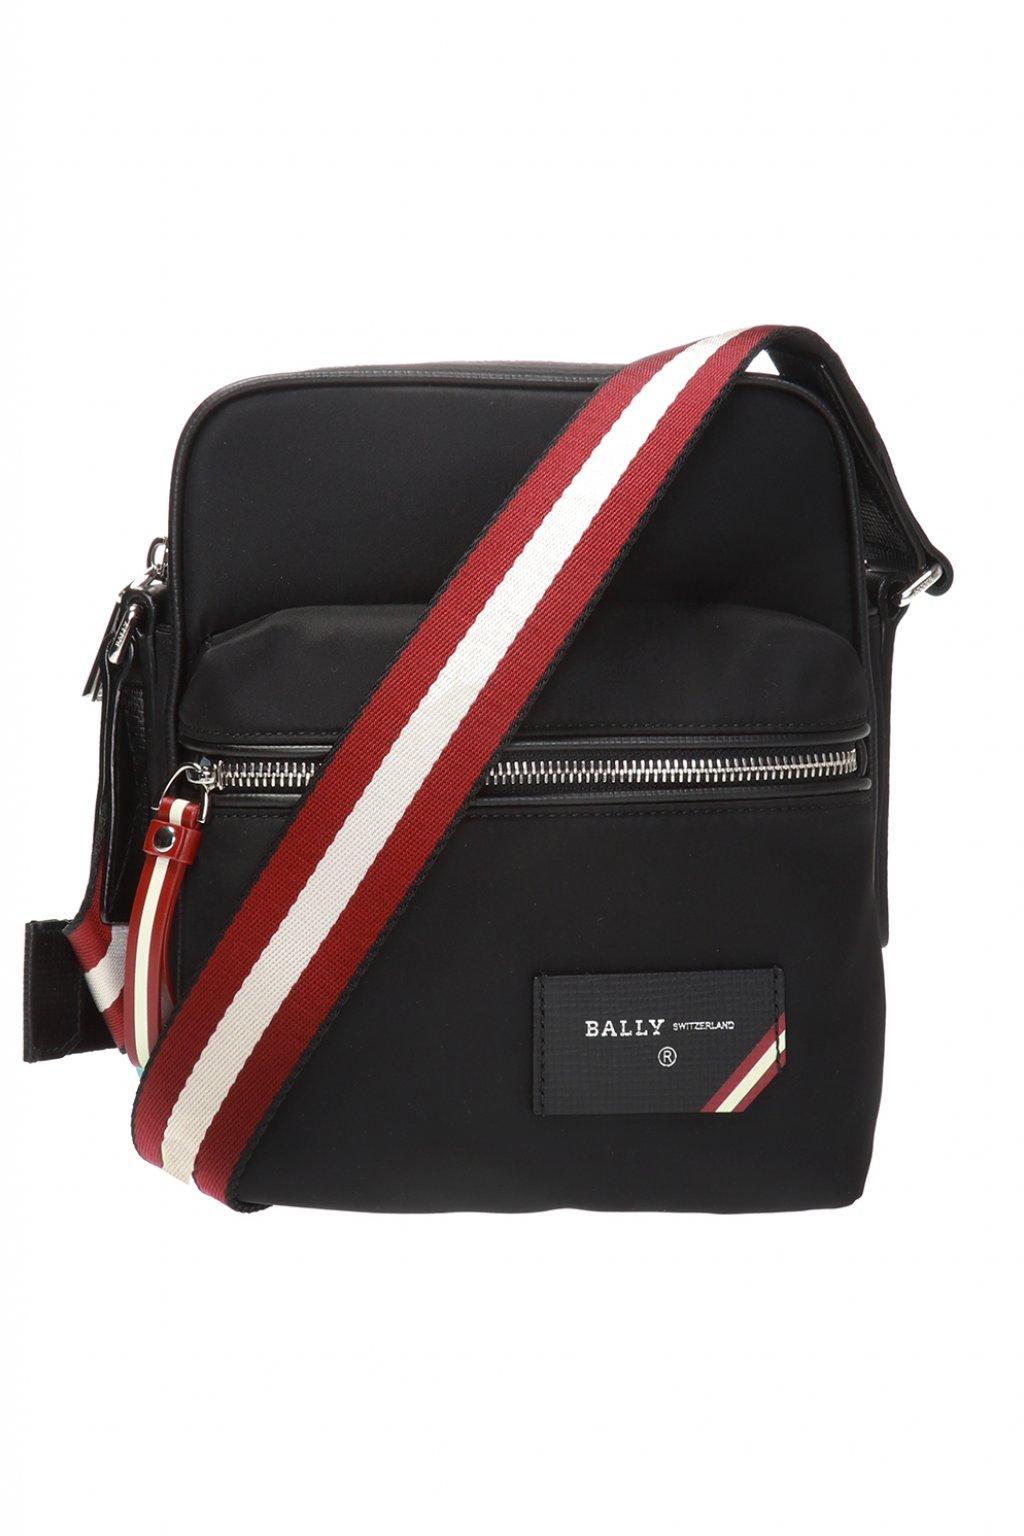 Bally Synthetic 'faara' Patched Shoulder Bag in Black for Men - Lyst